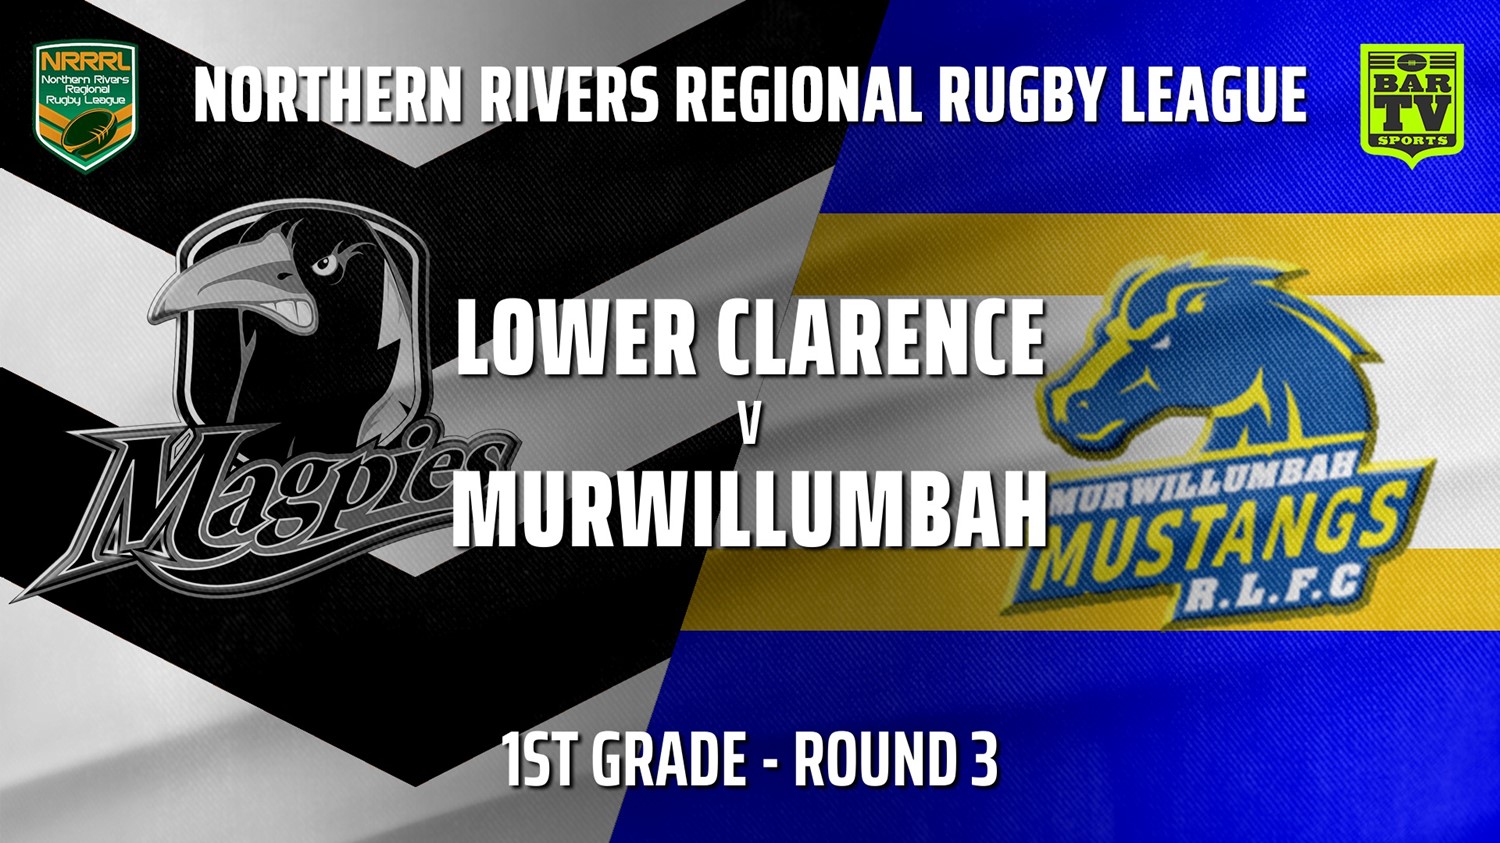 210516-NRRRL Round 3 - 1st Grade - Lower Clarence Magpies v Murwillumbah Mustangs Slate Image